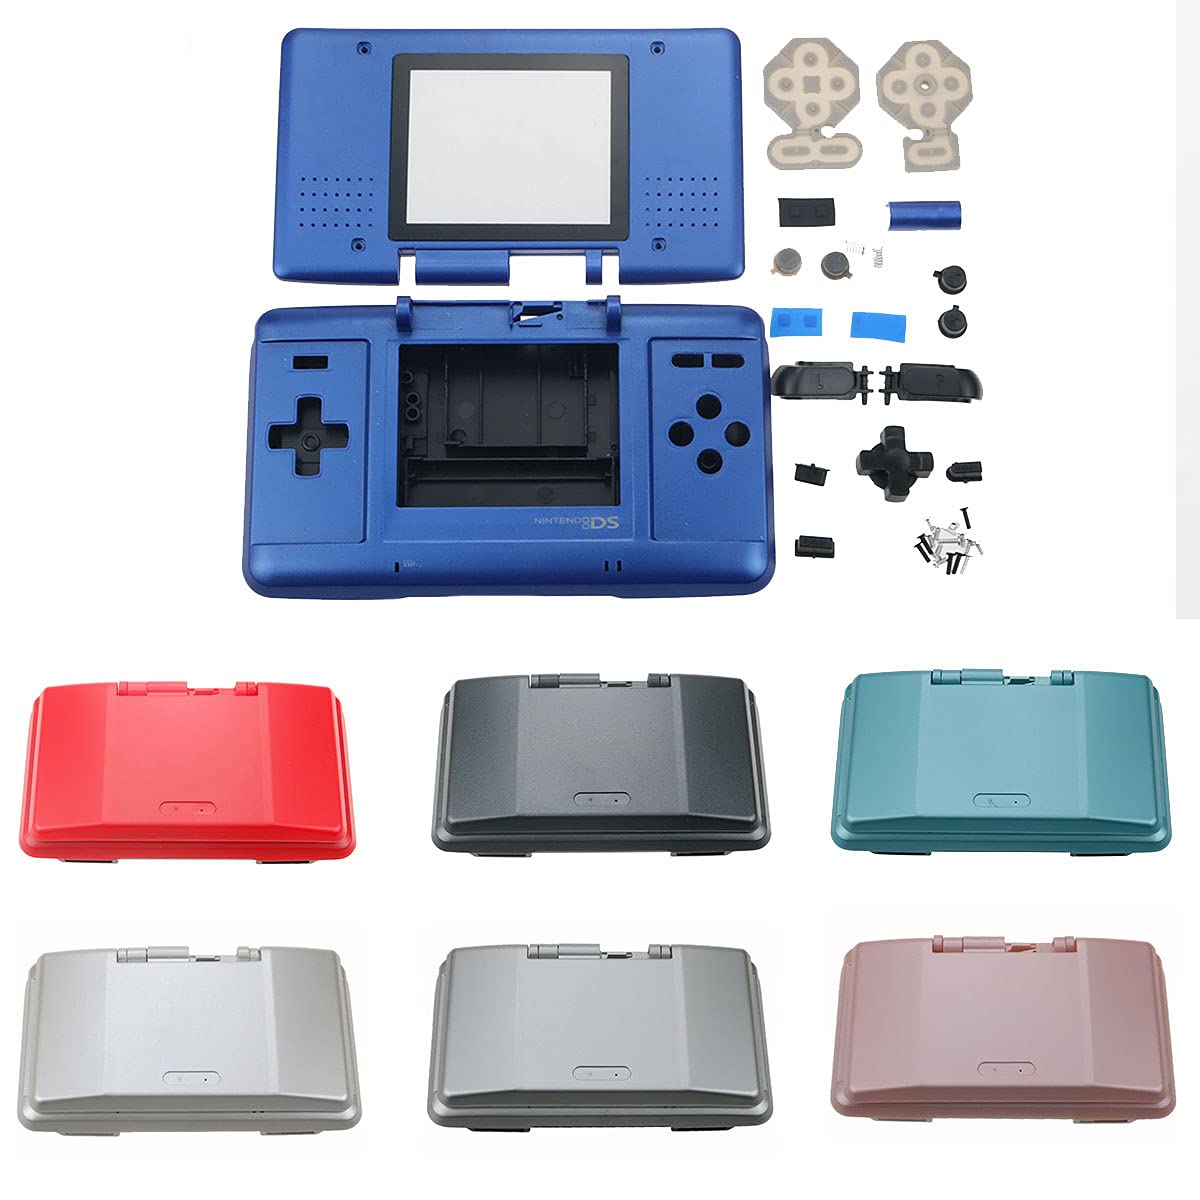 Melocyphia Full Housing Case Cover Shell with Buttons for NDS Console Replacement (Silver)